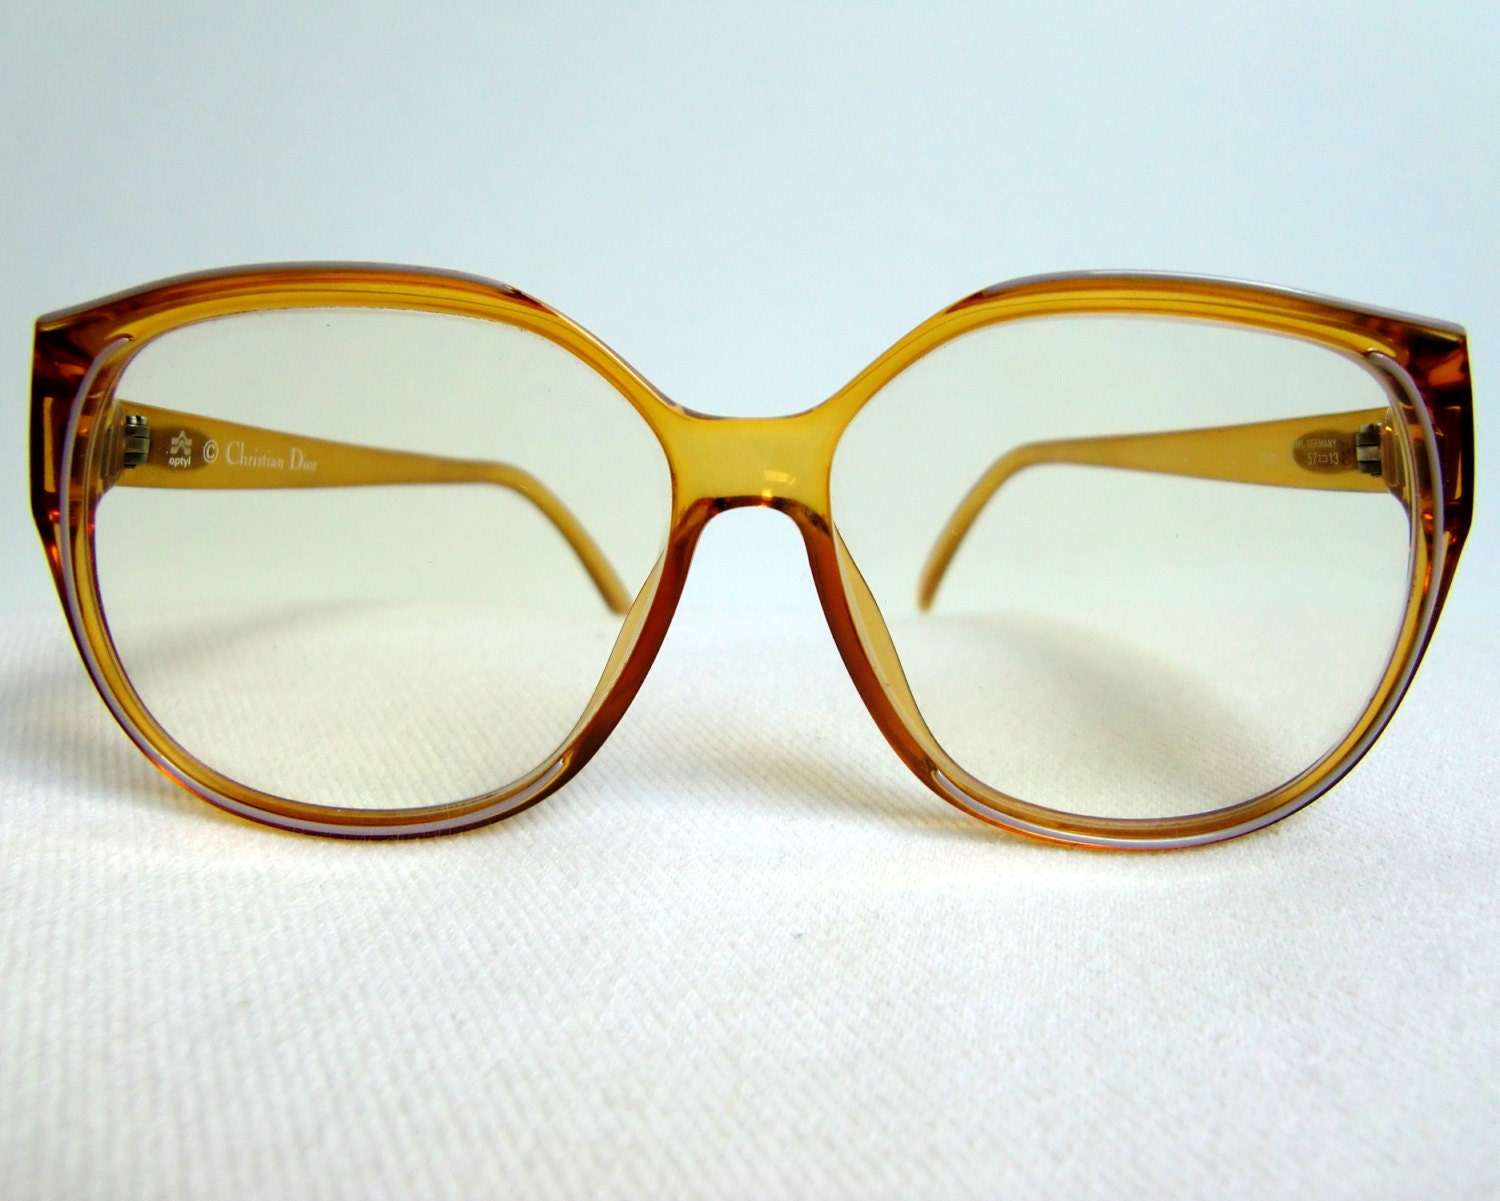 Vintage CHRISTIAN DIOR Glasses 2160 Amber by ArmoireAncienne